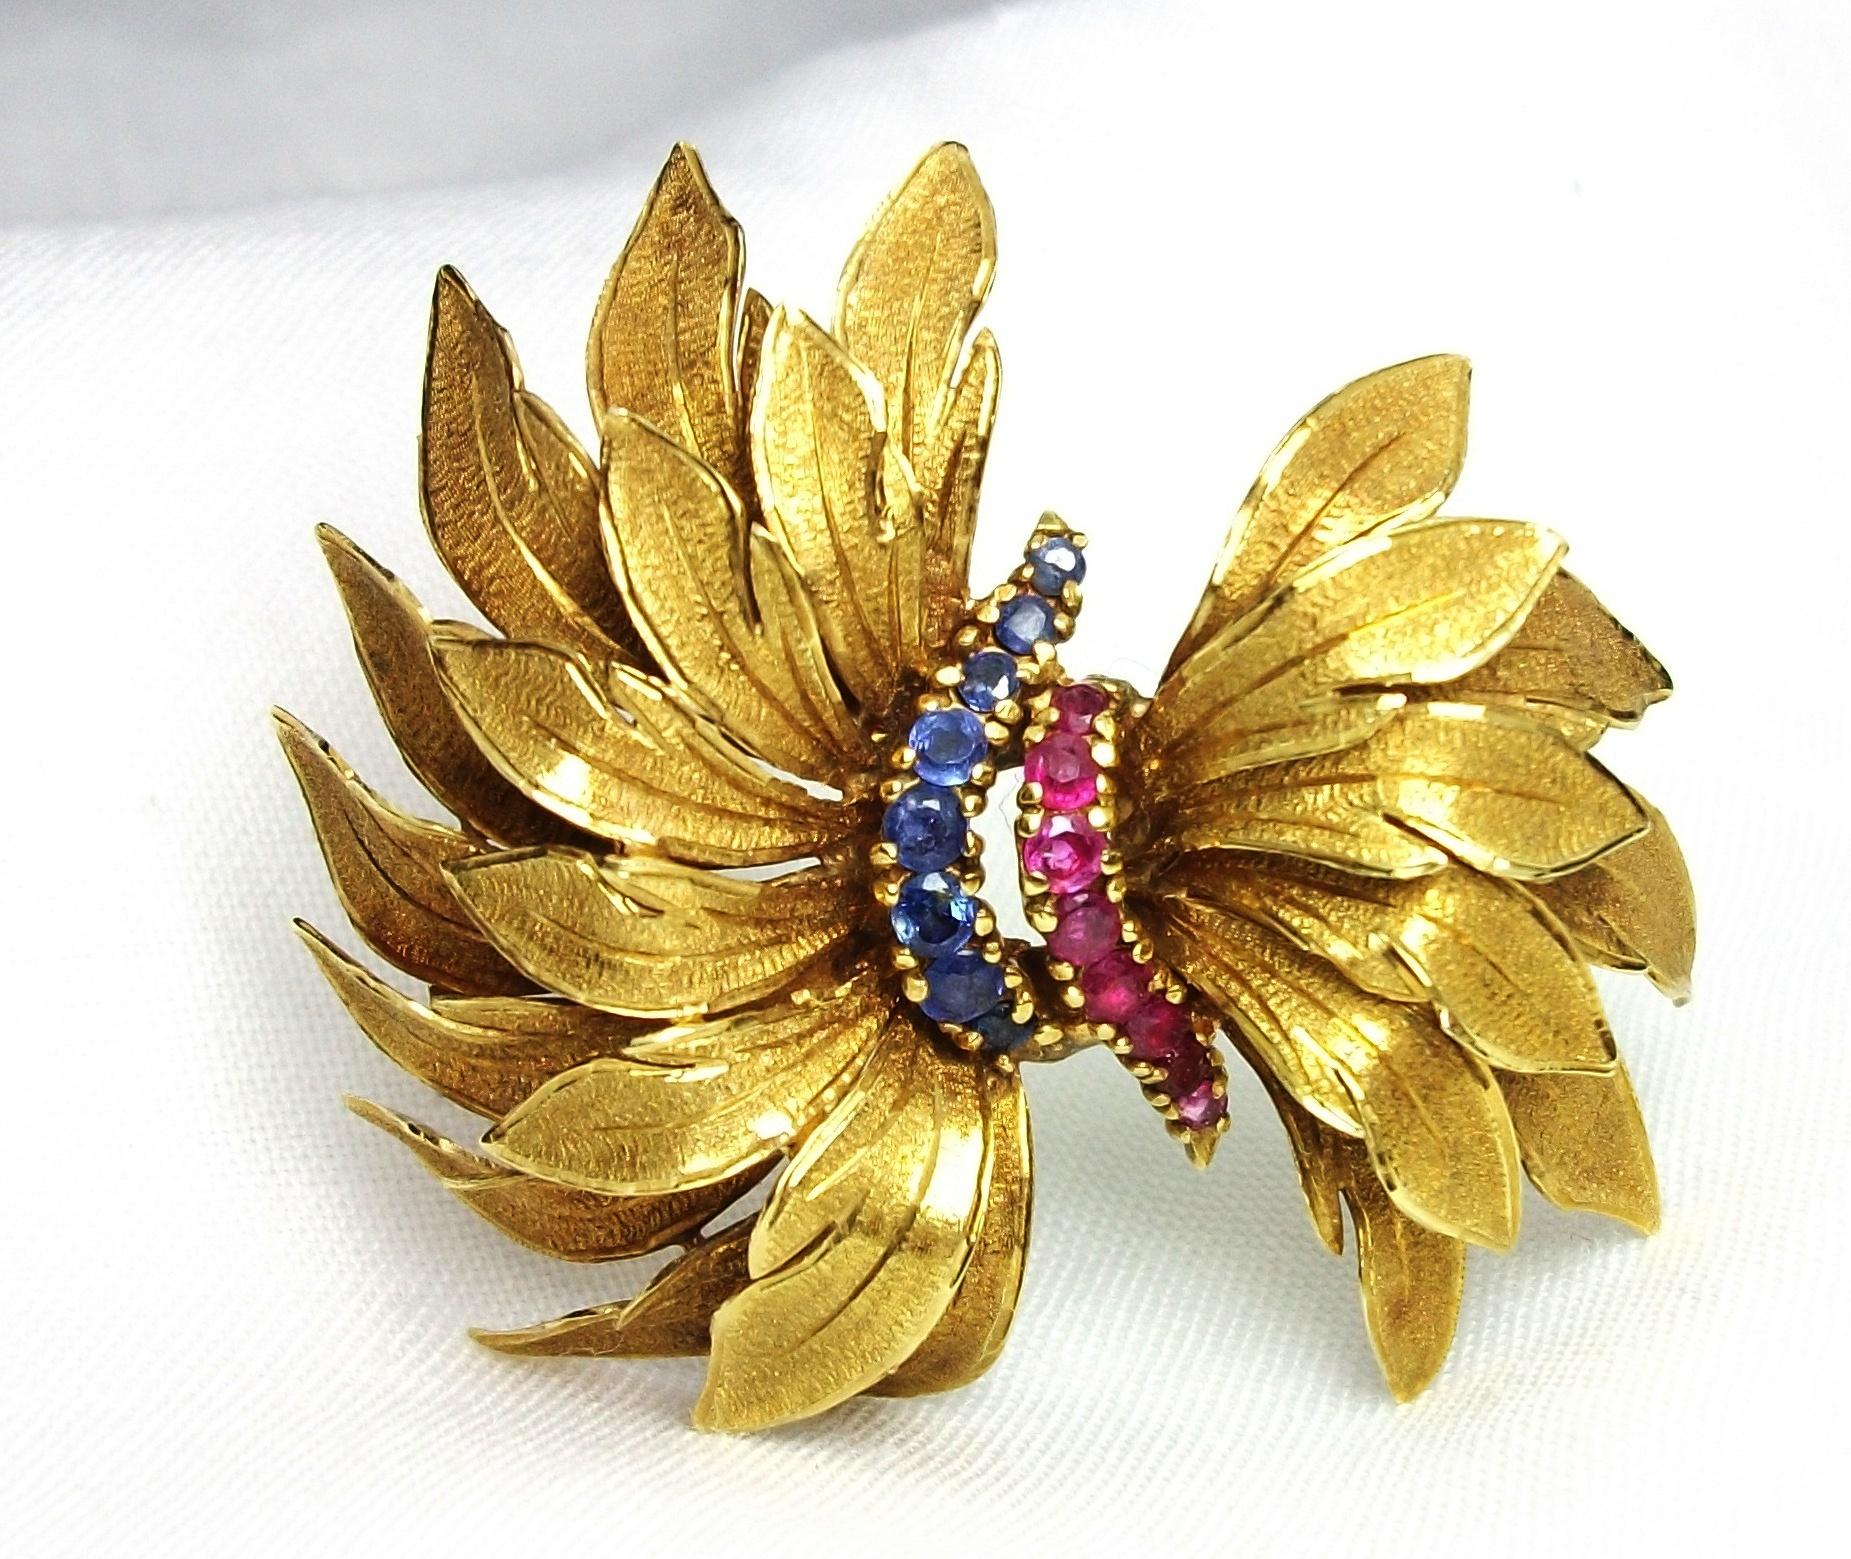 Brilliant Cut Vintage 1950s Rubies Sapphires 18 Karat Yellow Gold Bow Brooch For Sale